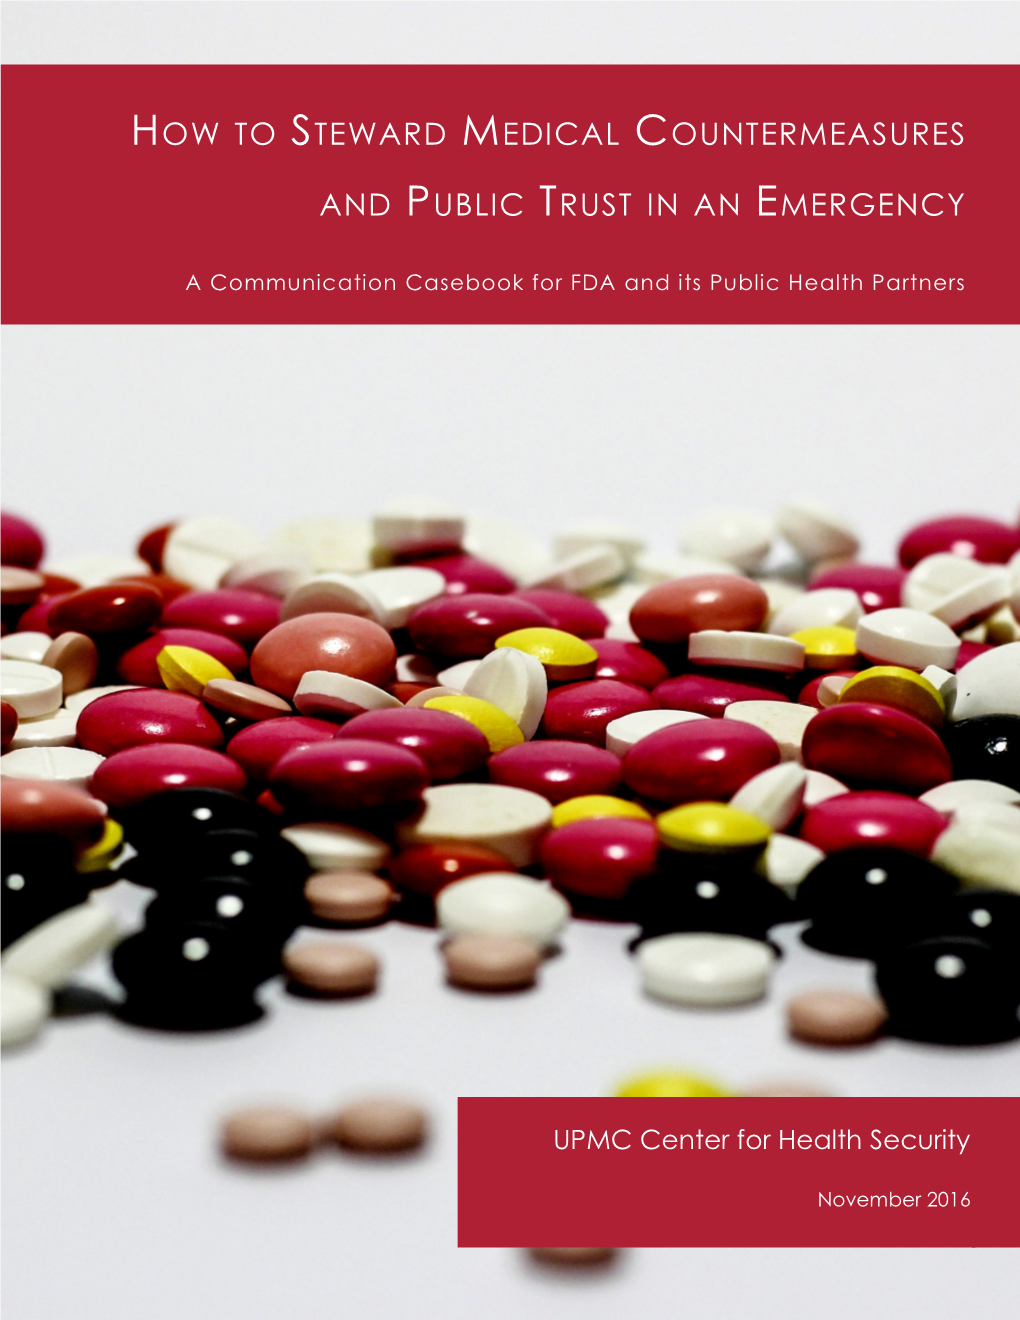 How to Steward Medical Countermeasures and Public Trust in An